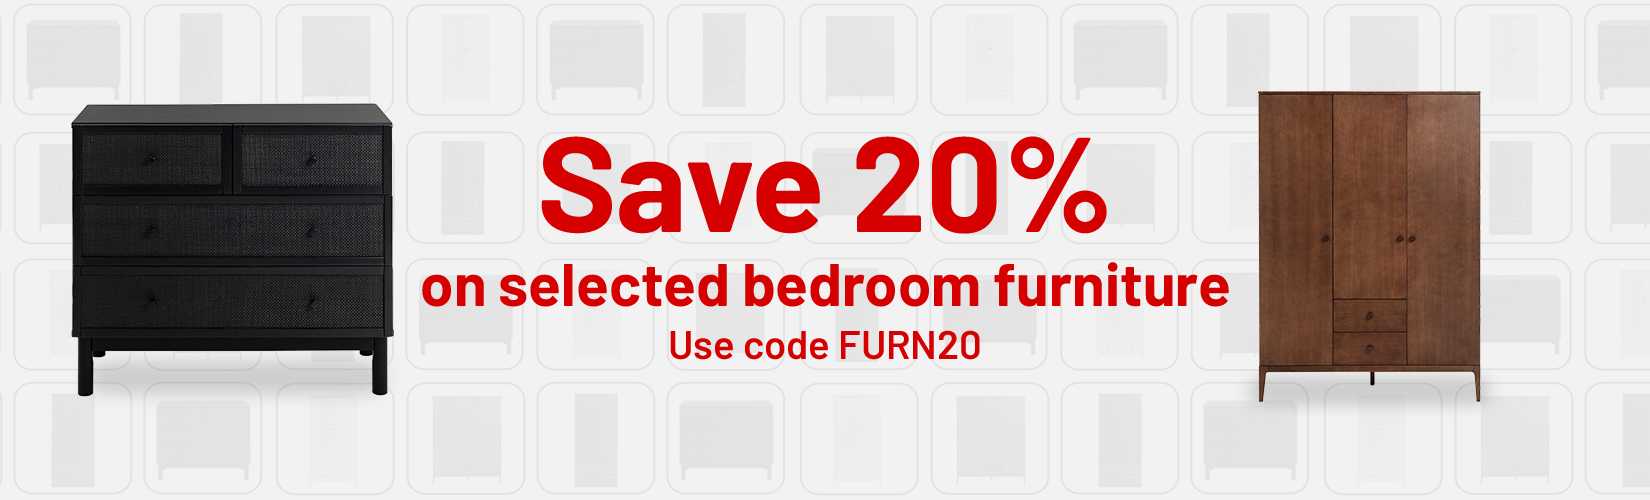 Save 20% on selected bedroom furniture with code FURN20. Apply code at checkout.